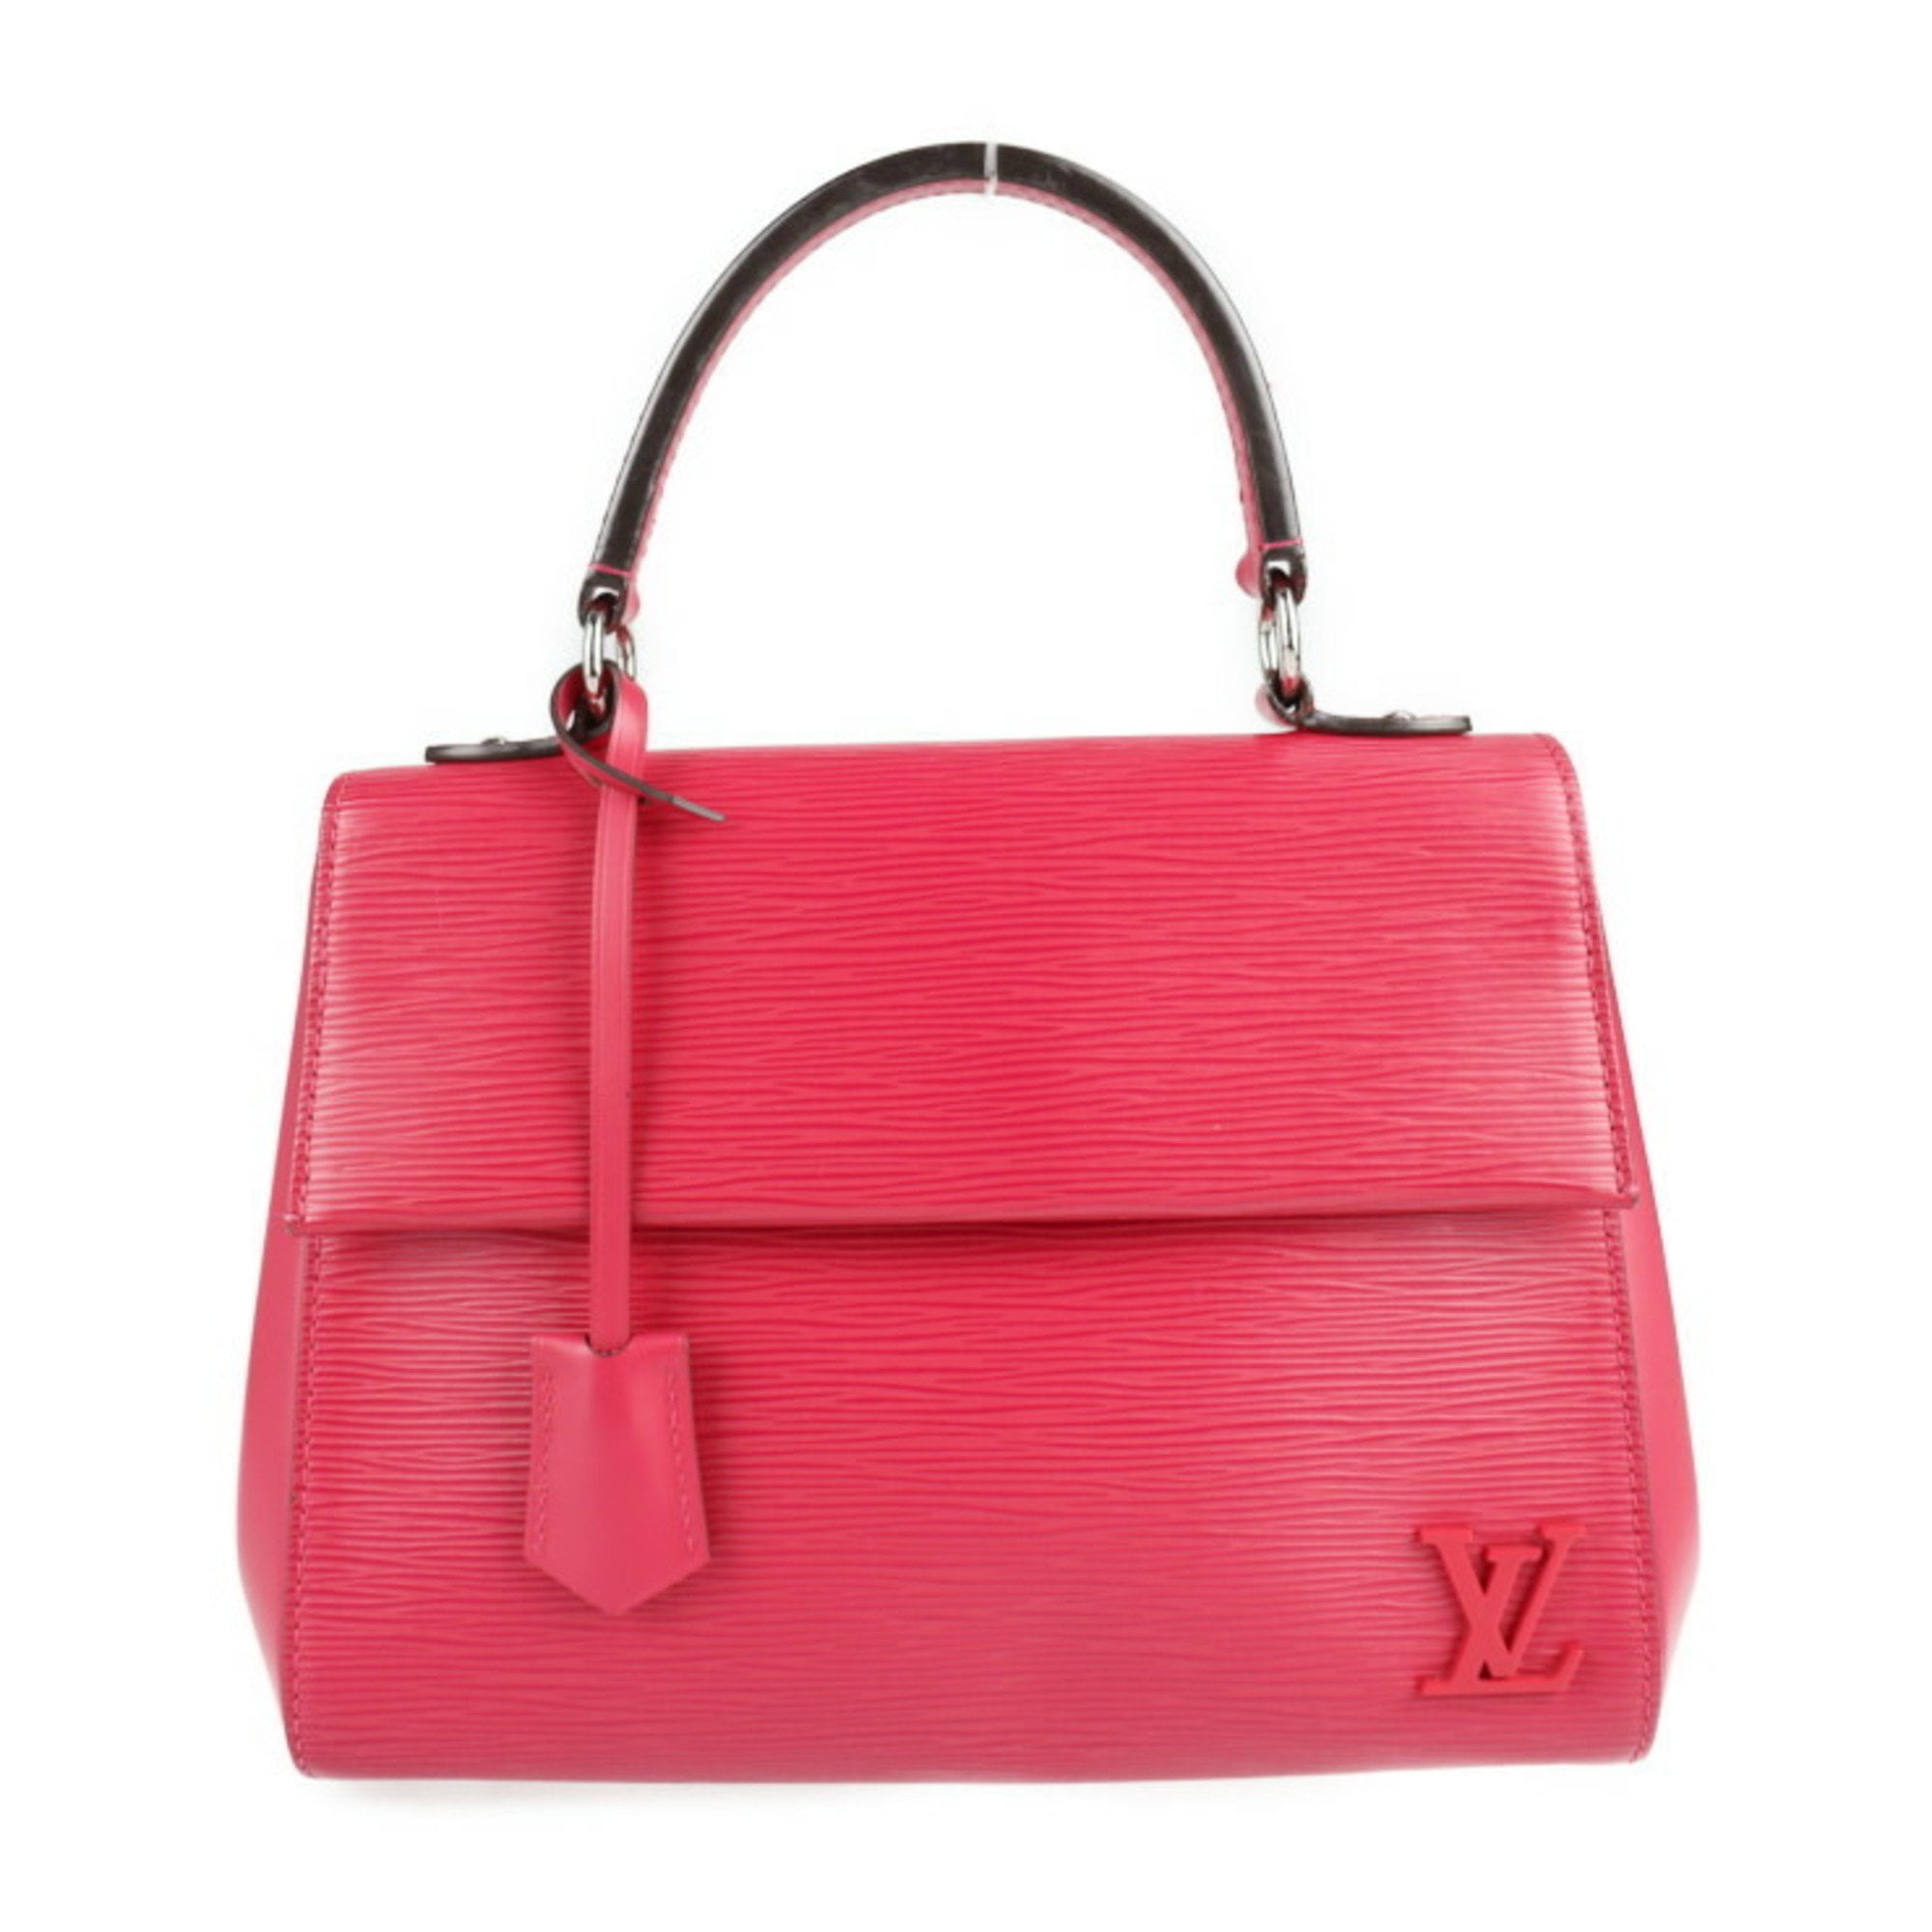 Authenticated Used LOUIS VUITTON Louis Vuitton Cluny BB Handbag M42051 Epi  Leather Hot Pink 2WAY Shoulder Bag Tote Shopping 